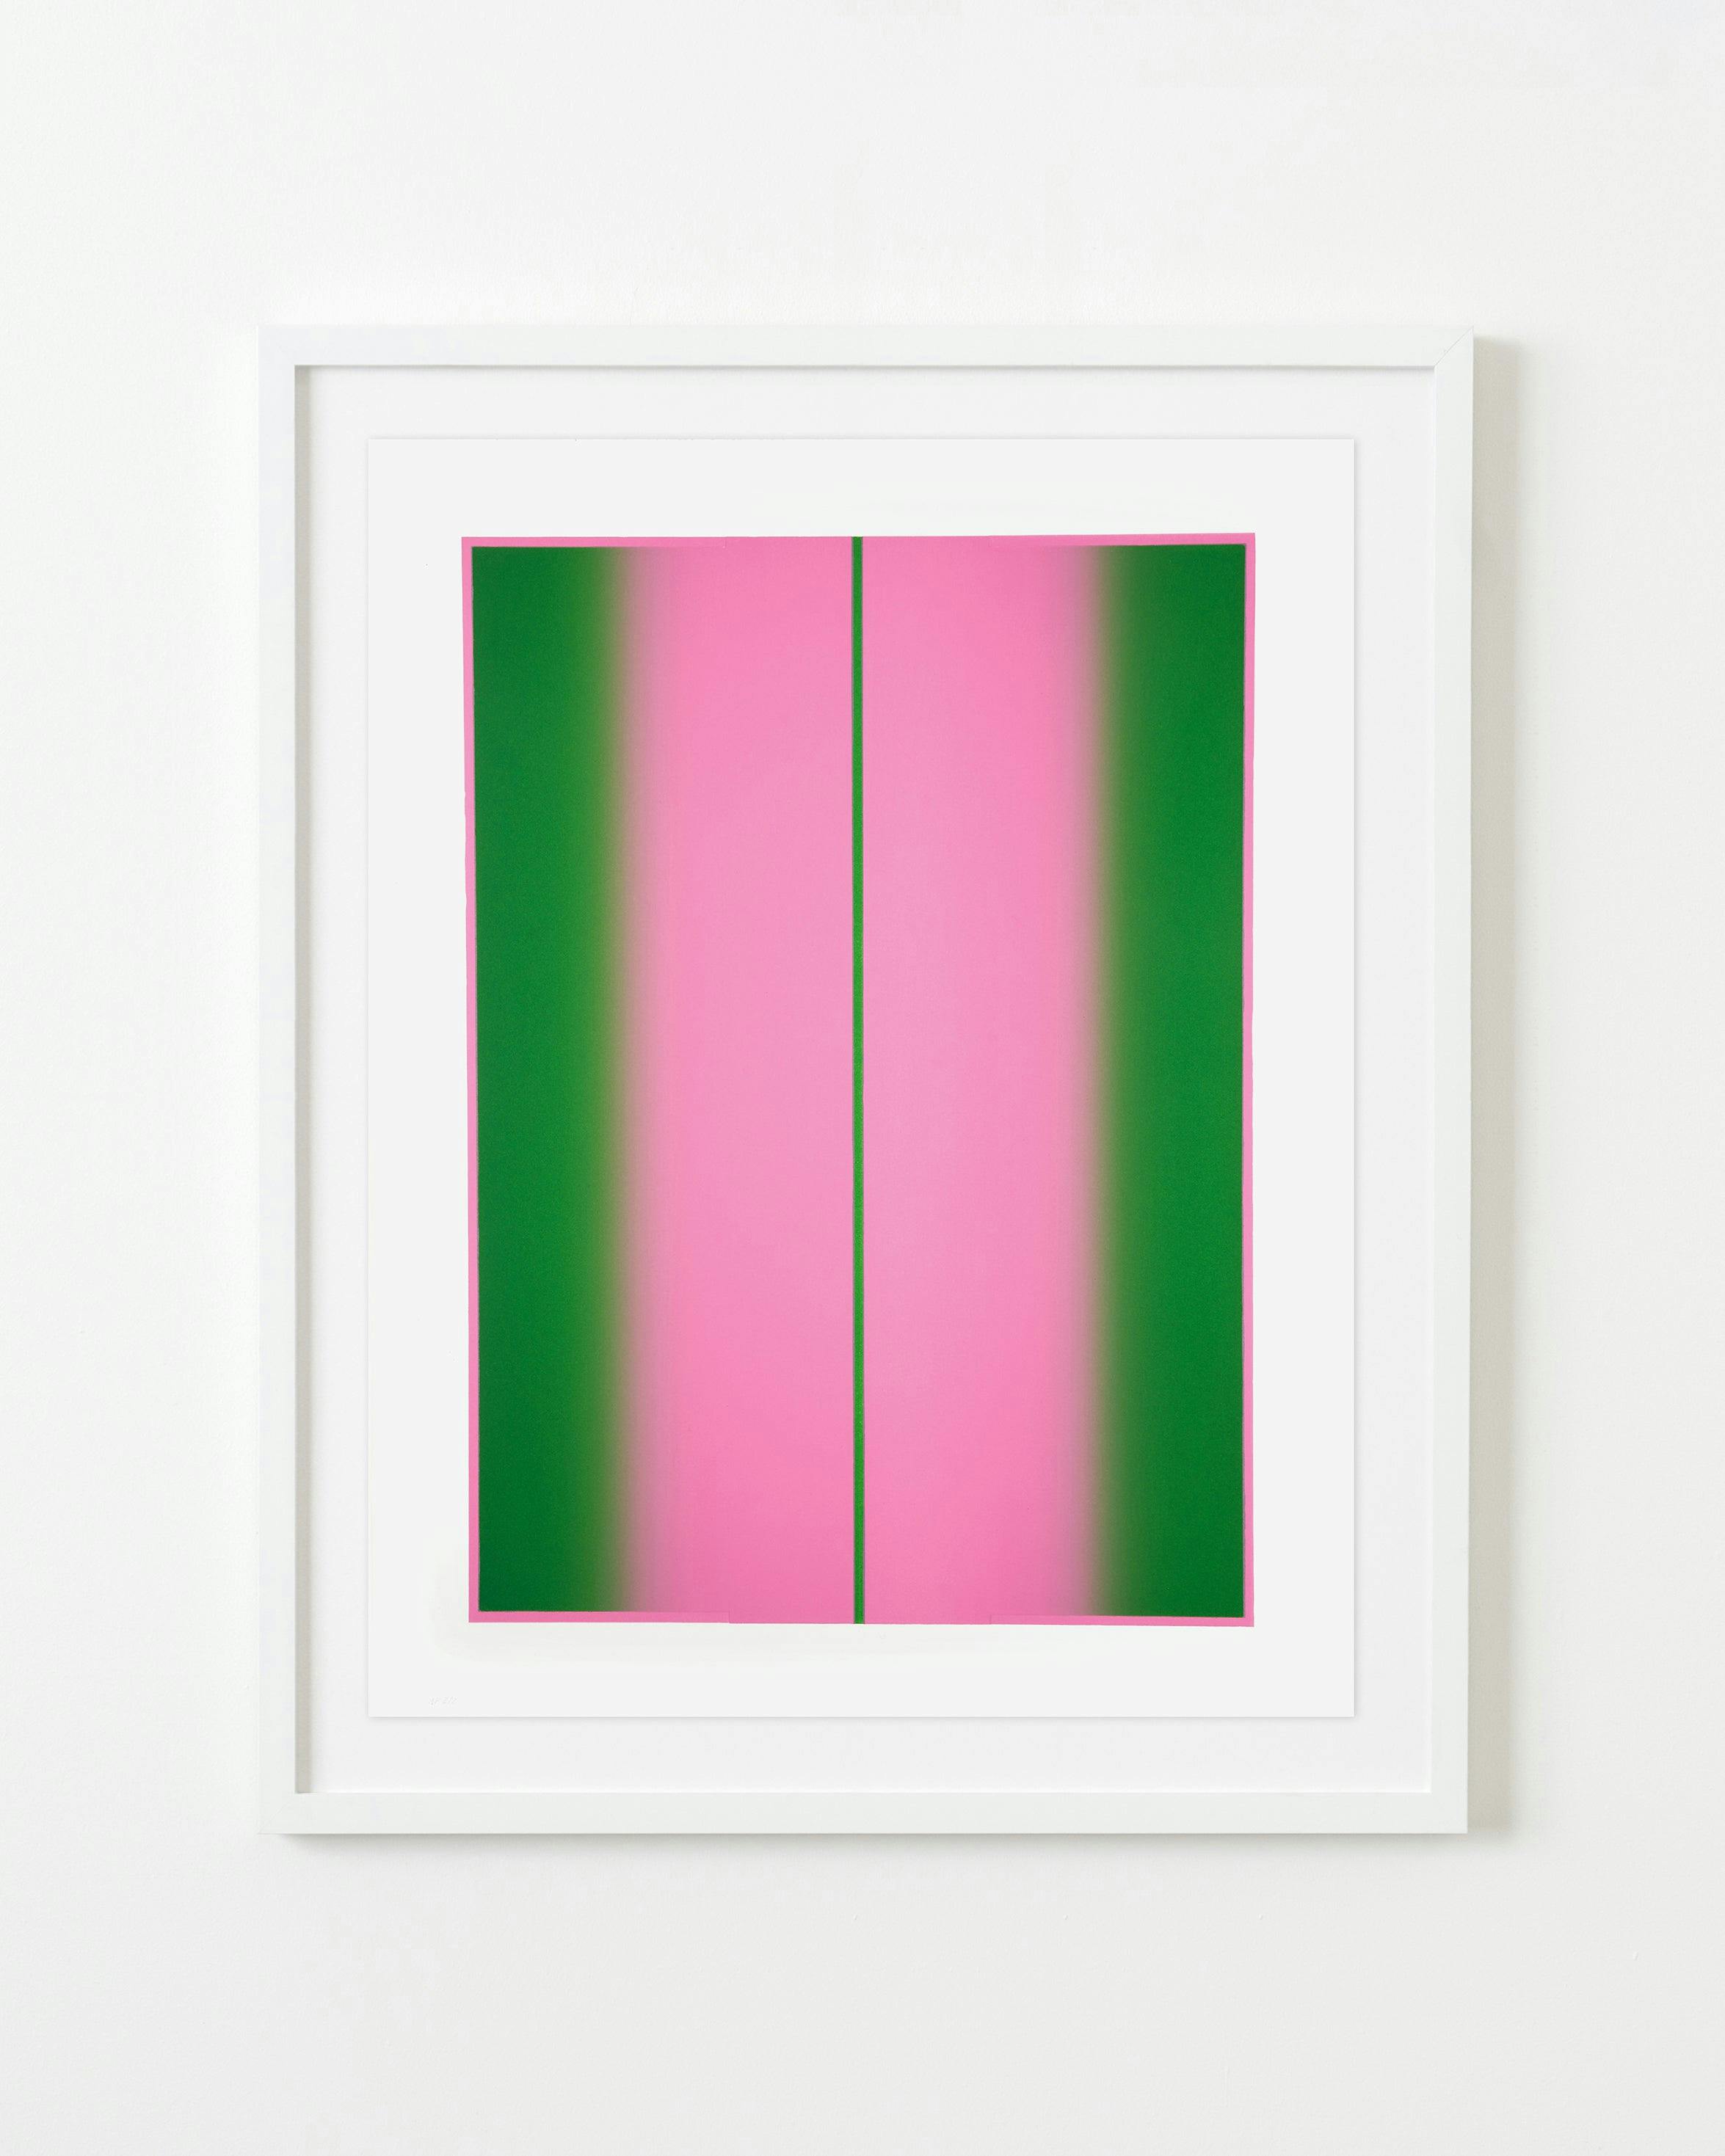 Print by Inka Bell titled "Green and Pink".